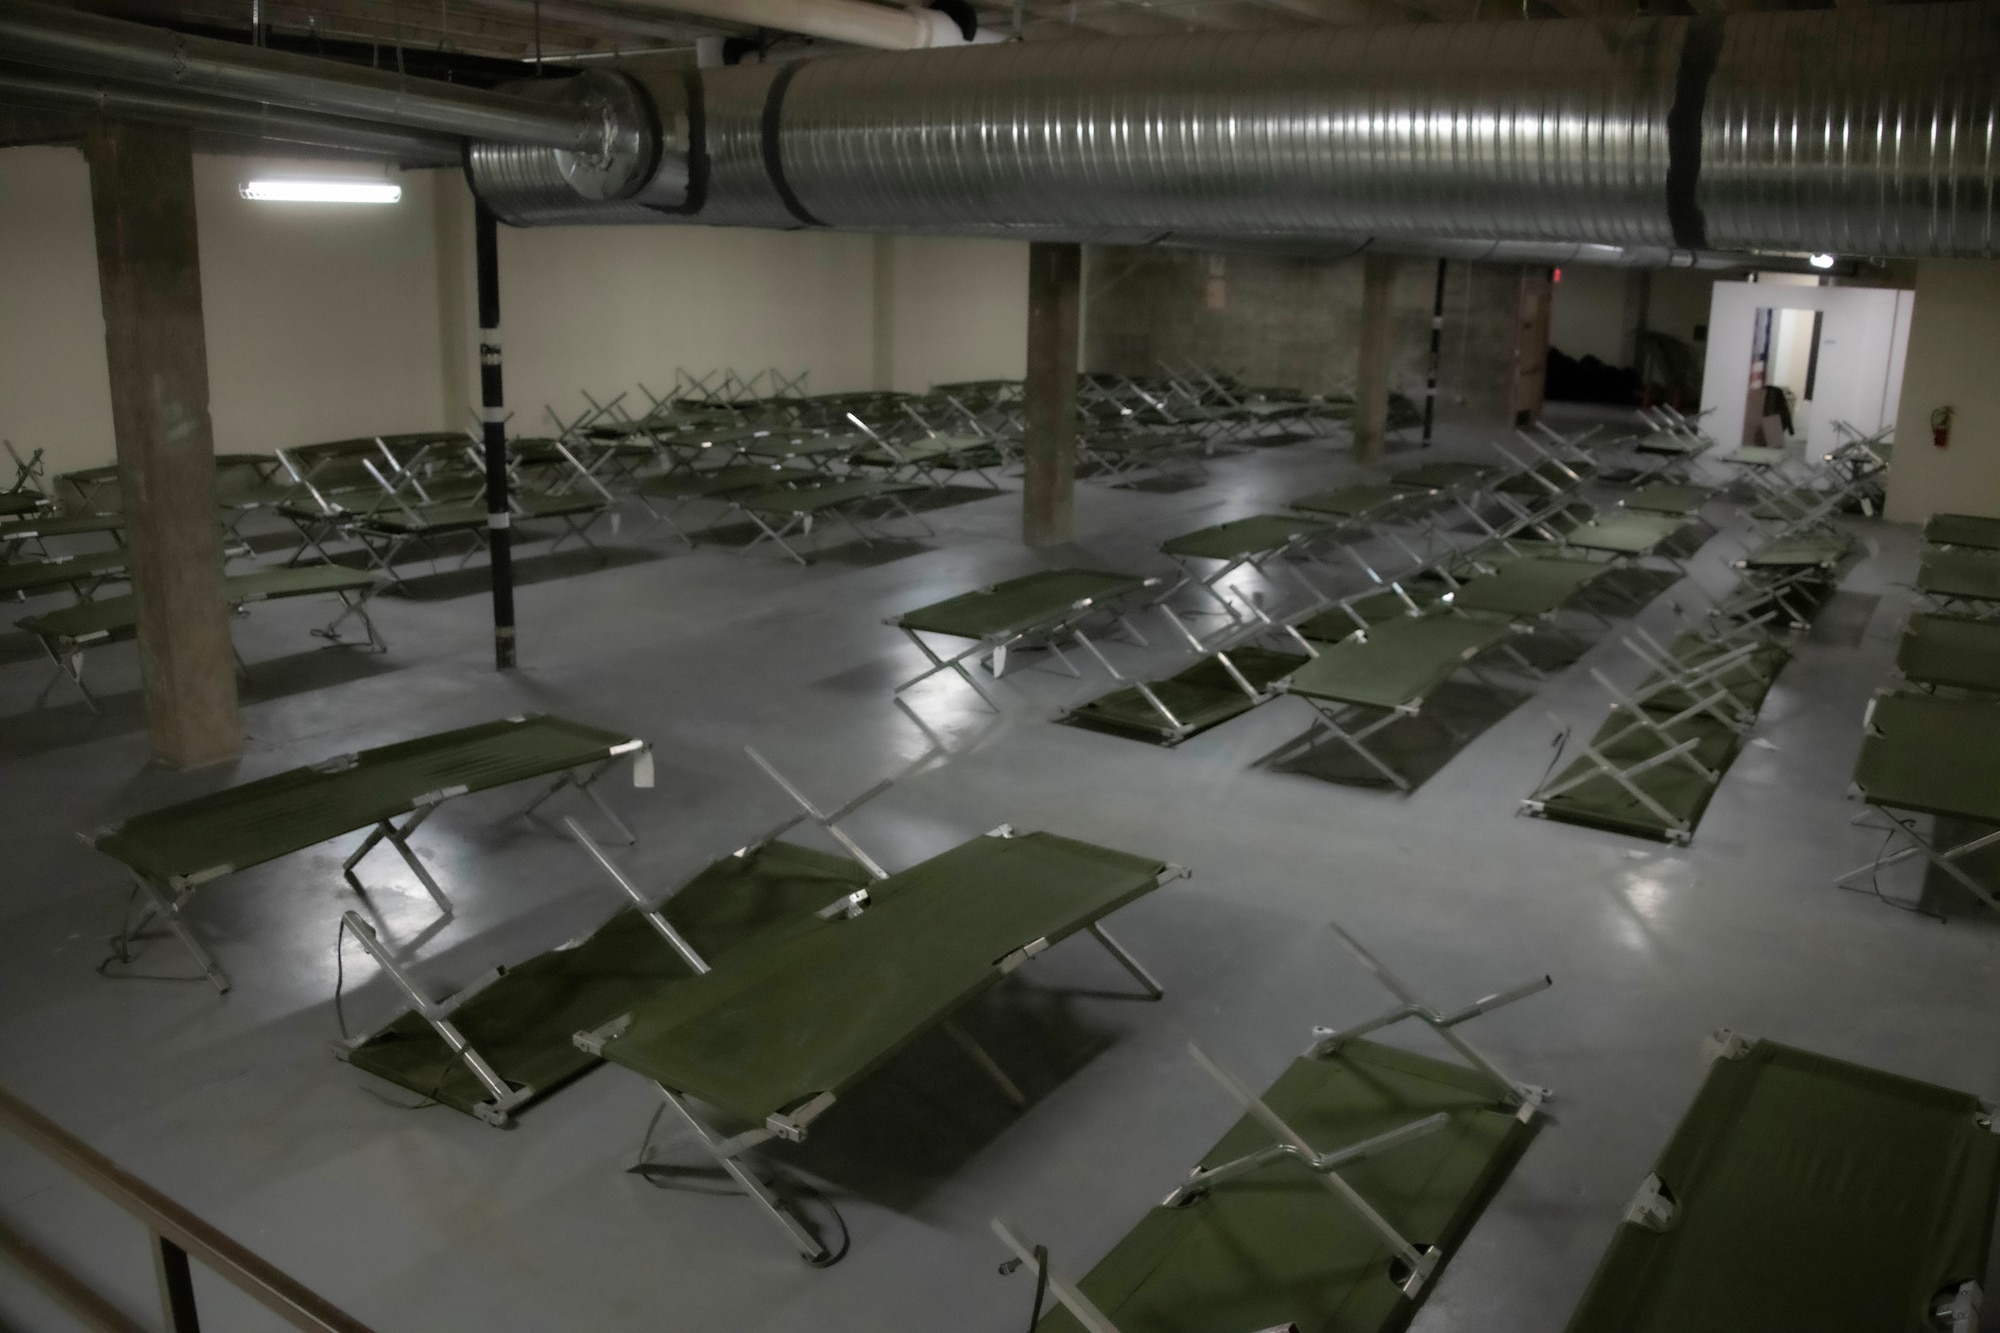 Sleeping cots are laid out in a room